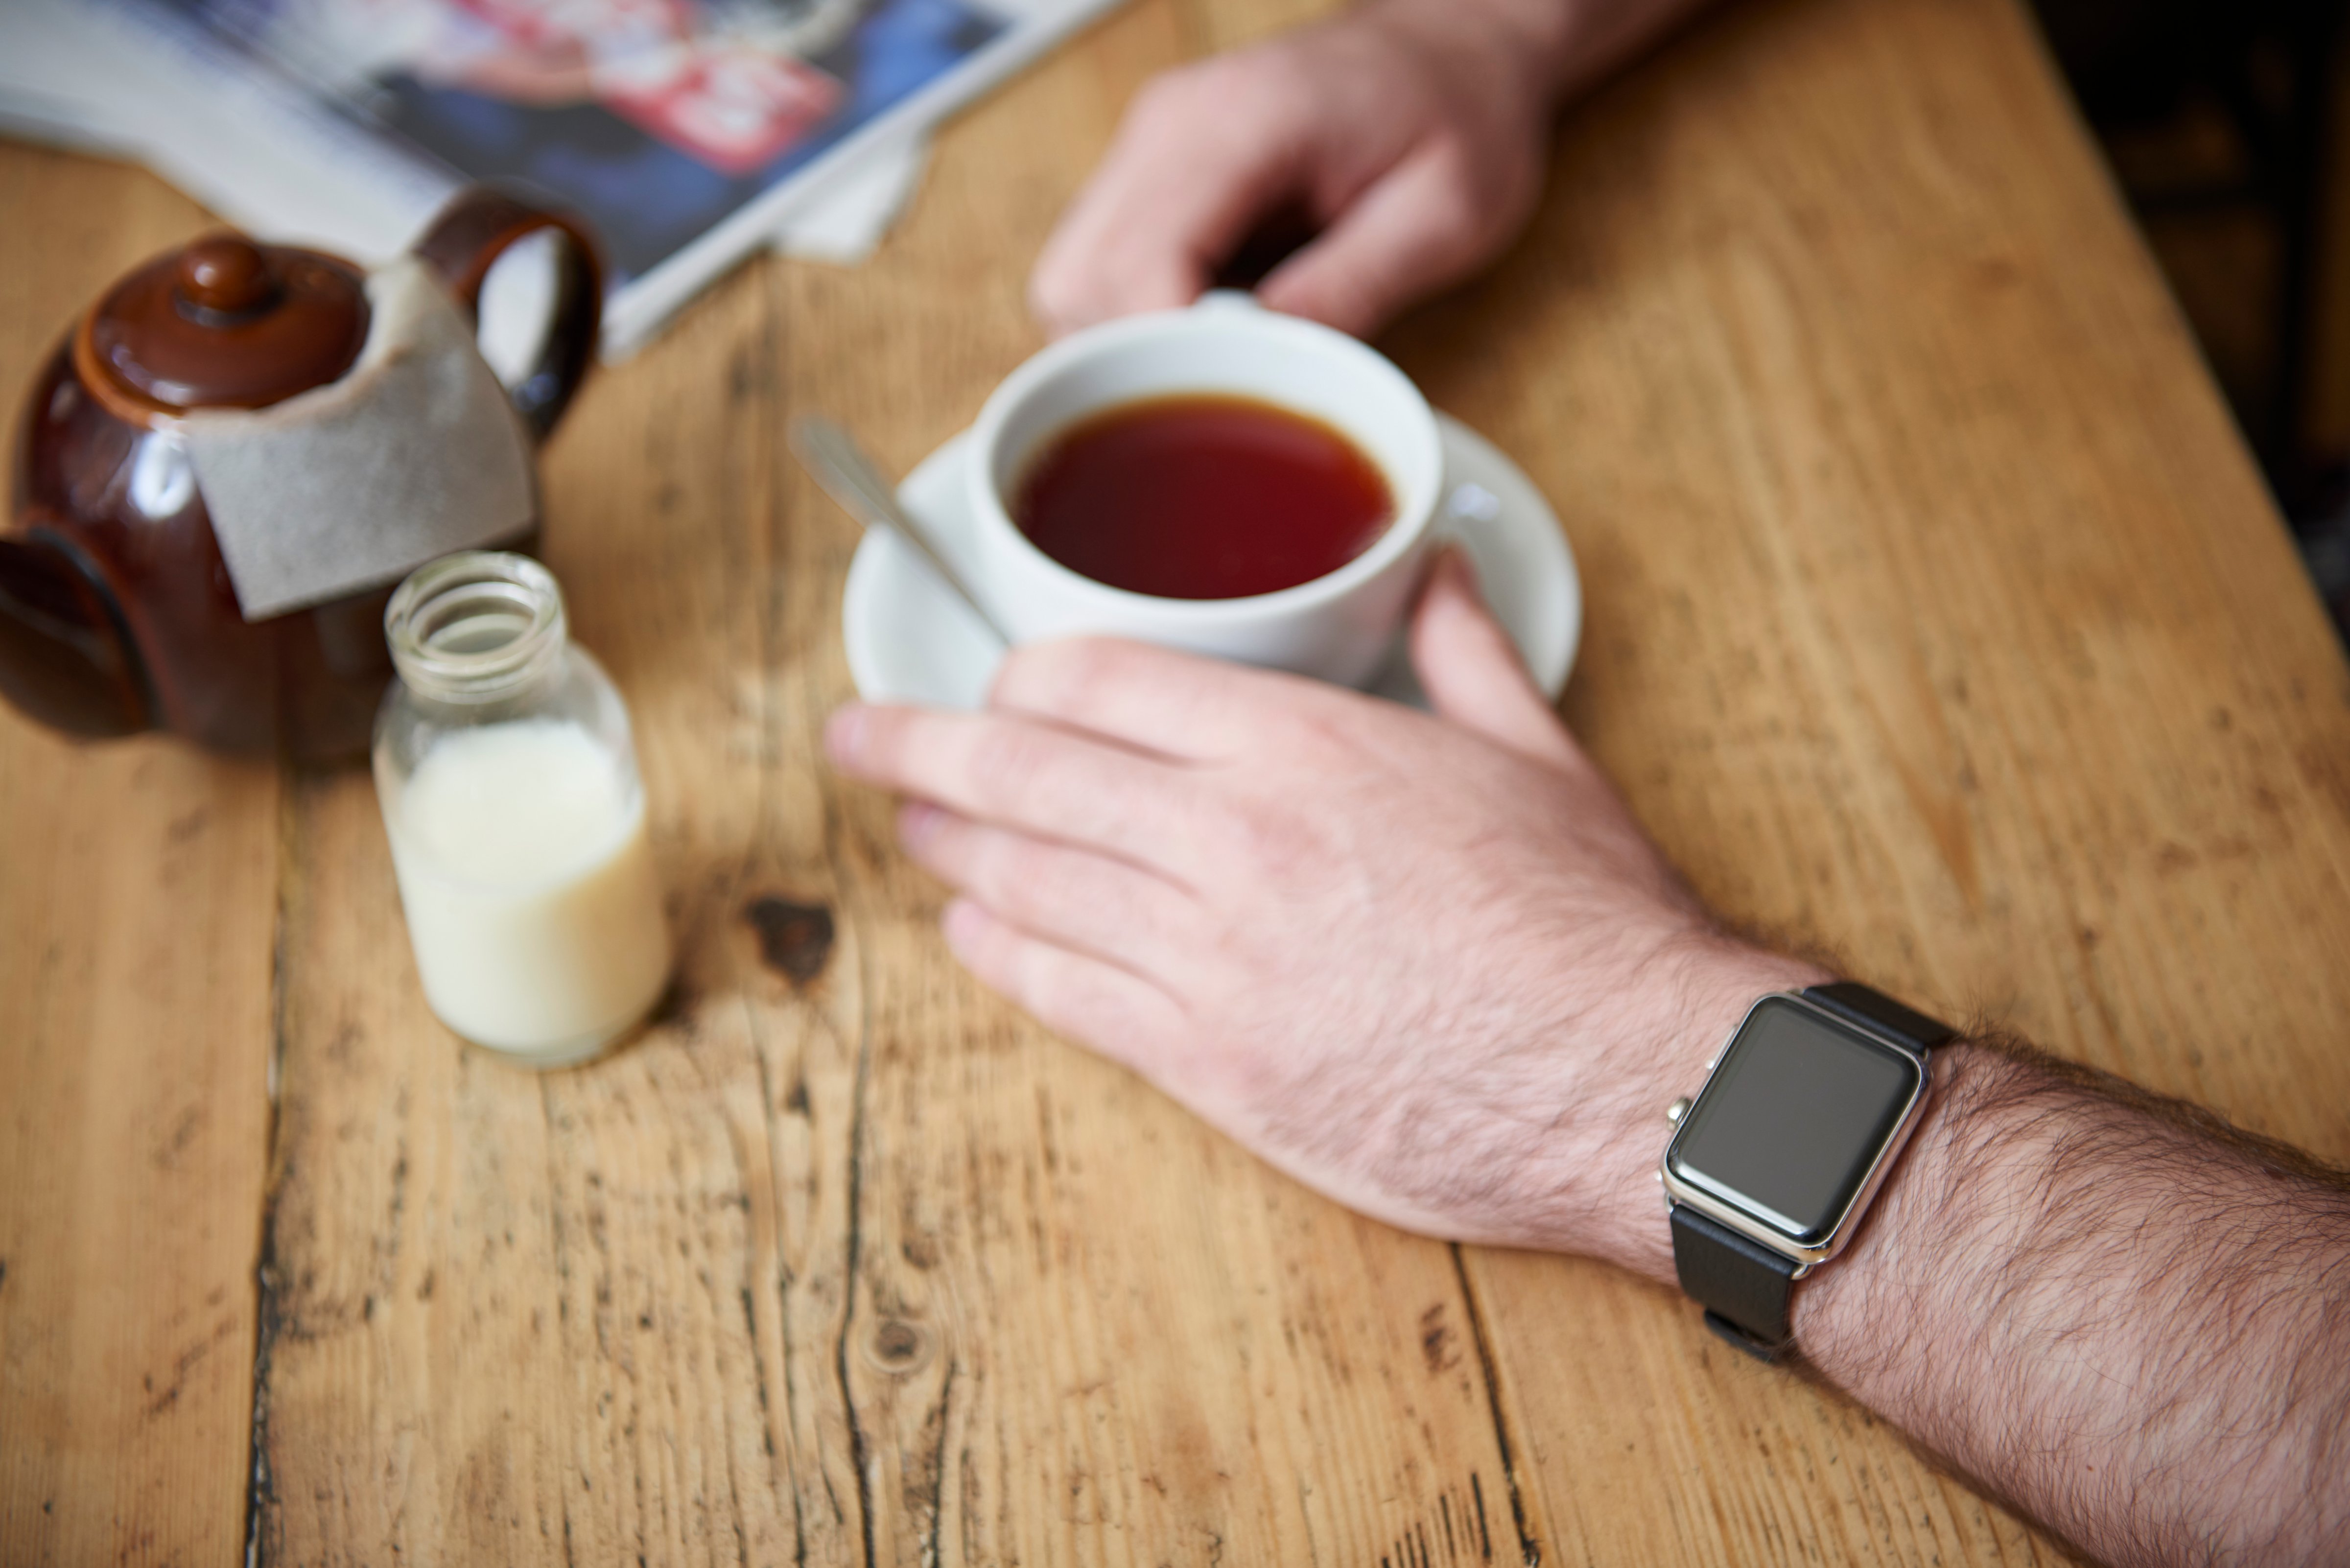 Detail of a man wearing an Apple Watch while sitting inside a cafe, taken on May 21, 2015. (Photo by Joseph Branston/Future Publishing via Getty Images) (Future Publishing&mdash;Future Publishing)